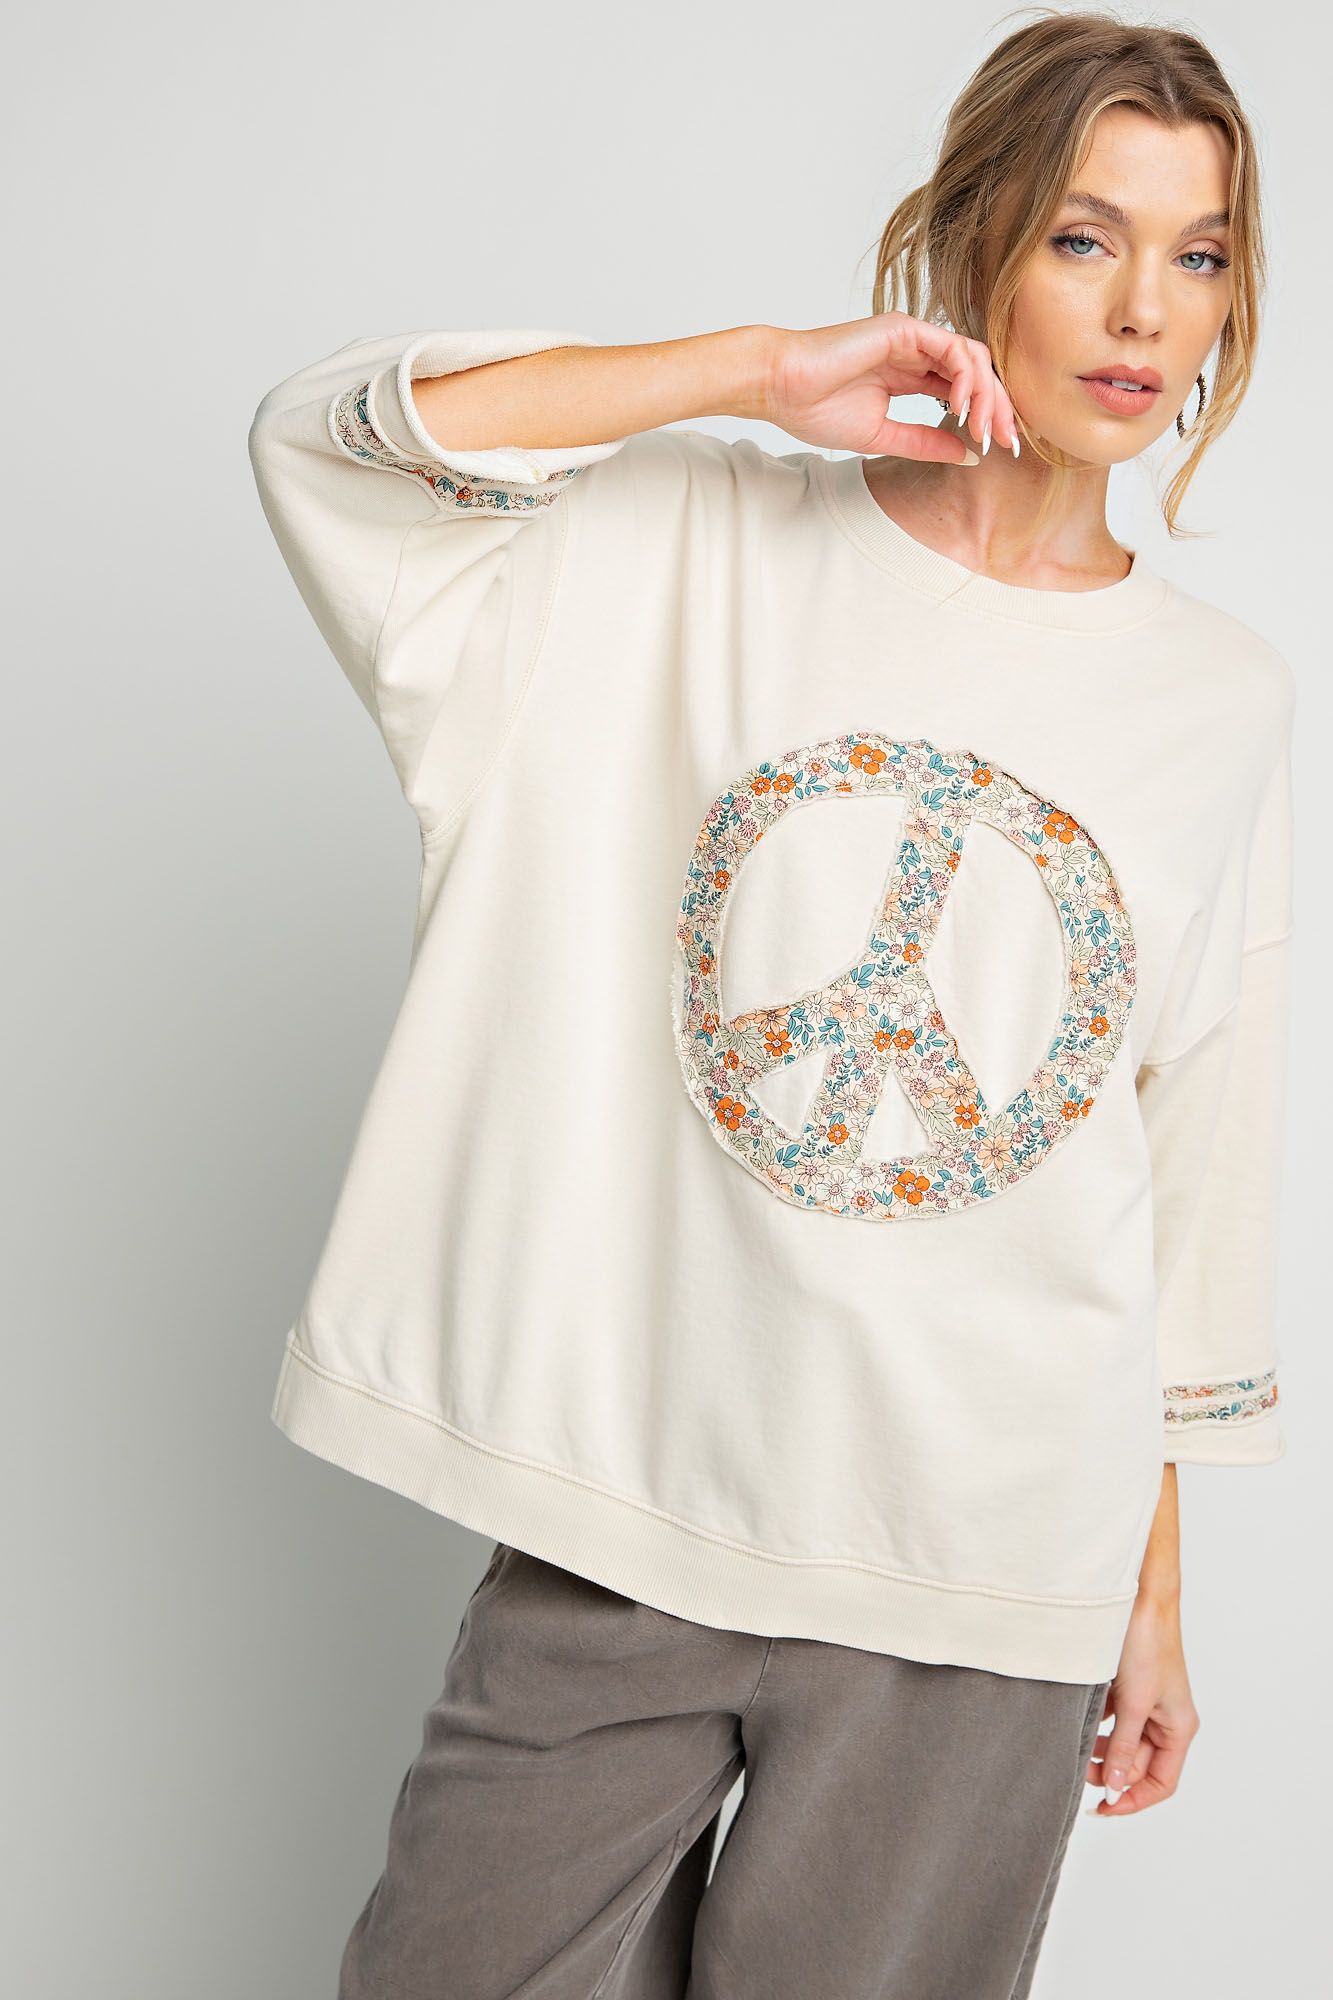 Slub mix ribbed fabric mineral wash top with peace sign symbol RESTOCKED Blouse Easel   